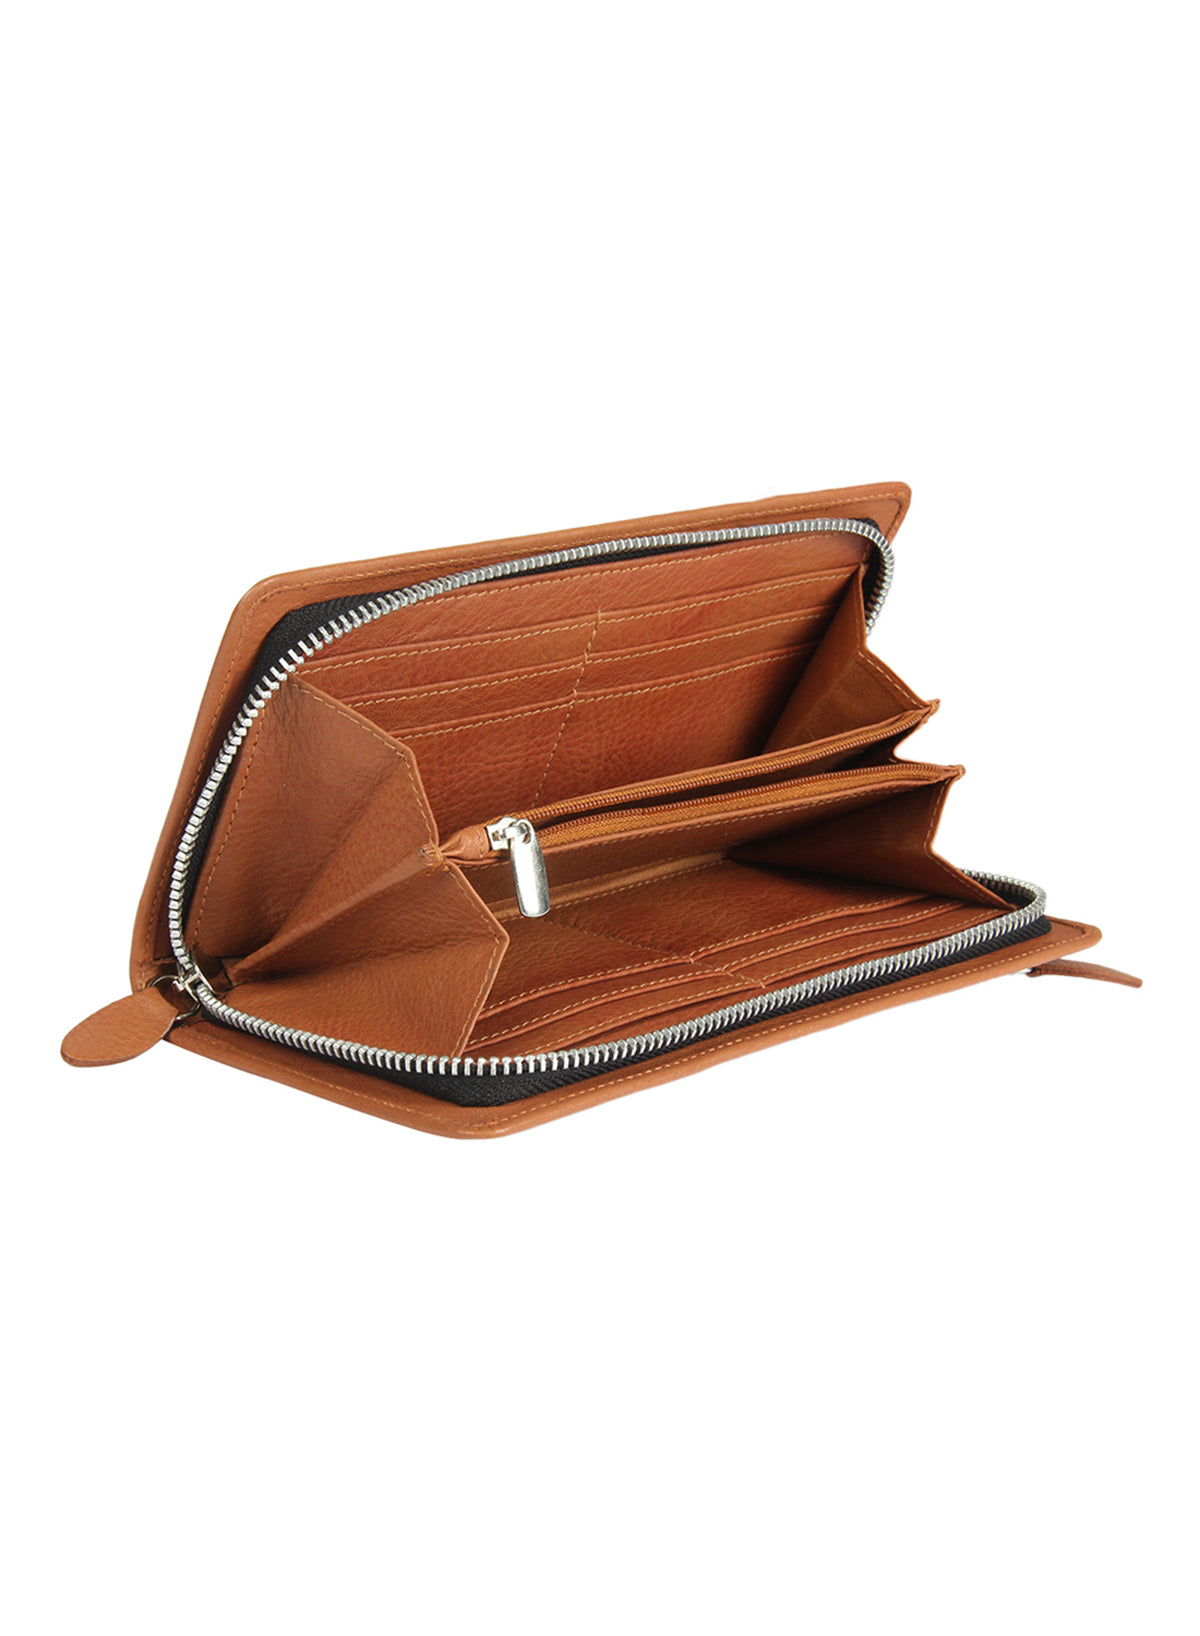 Genuine leather tan gusset clutch